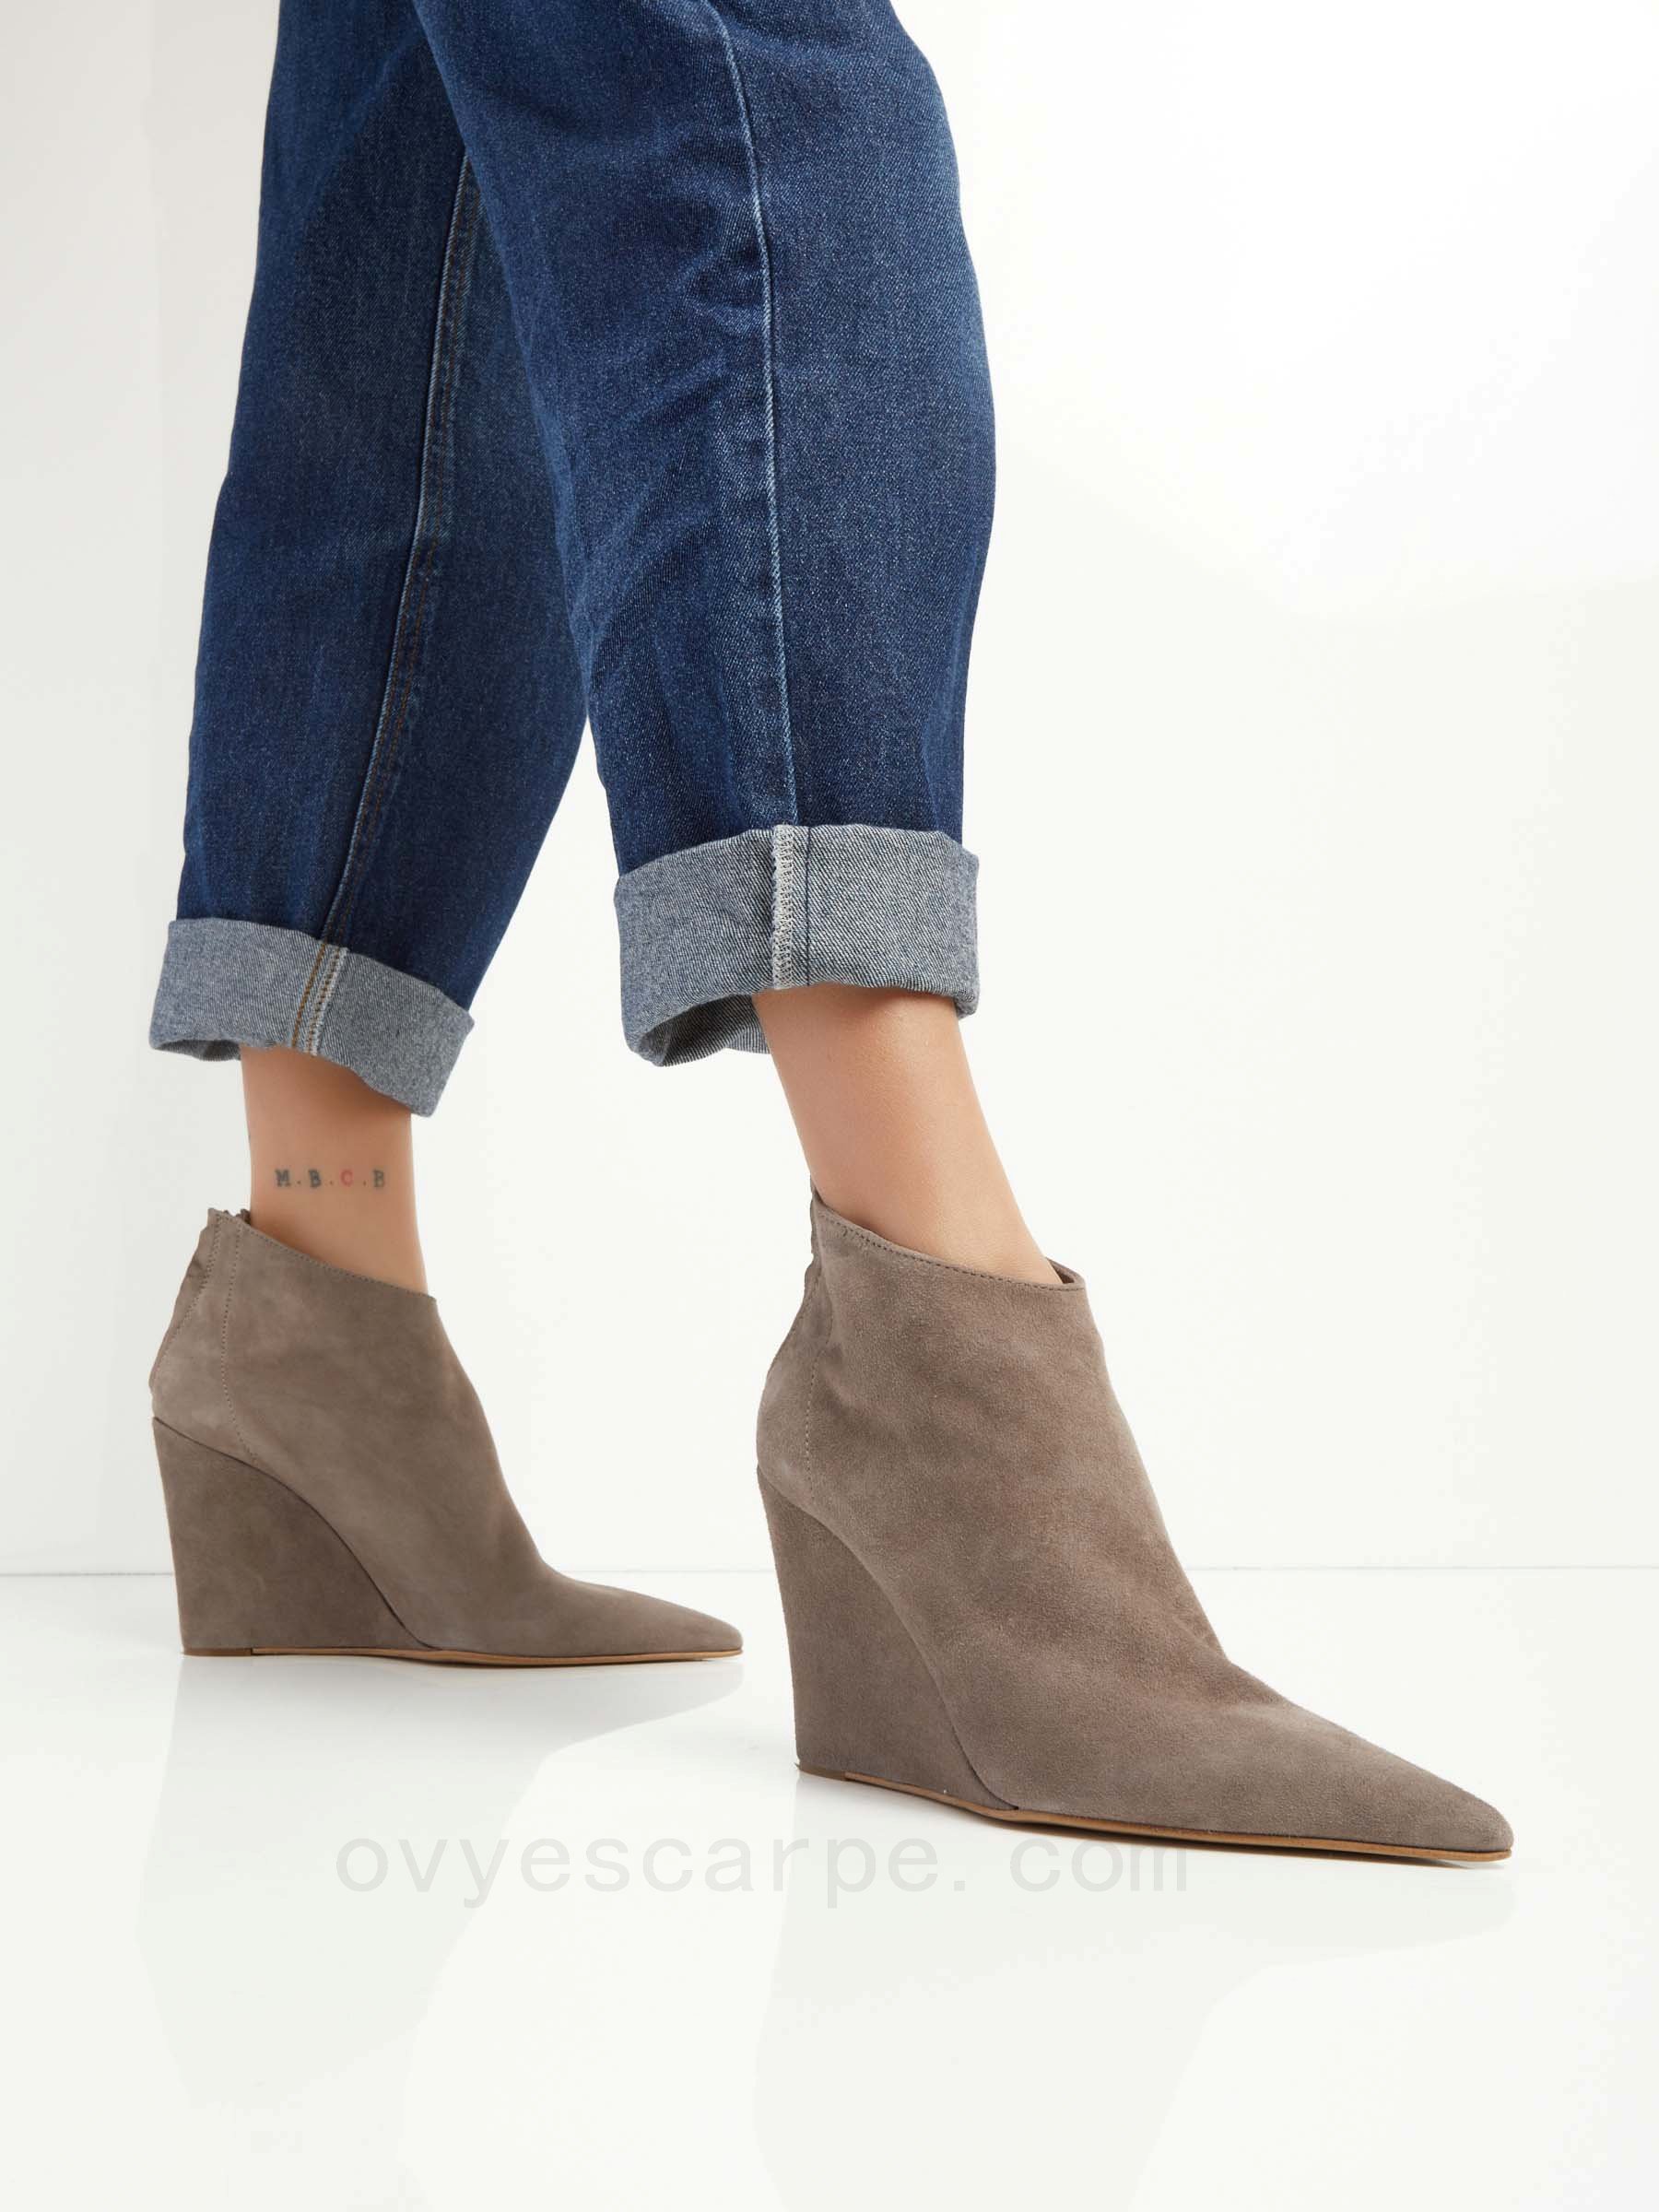 (image for) Online Wedge Leather Ankle Boots F08161027-0468 ovye scarpe